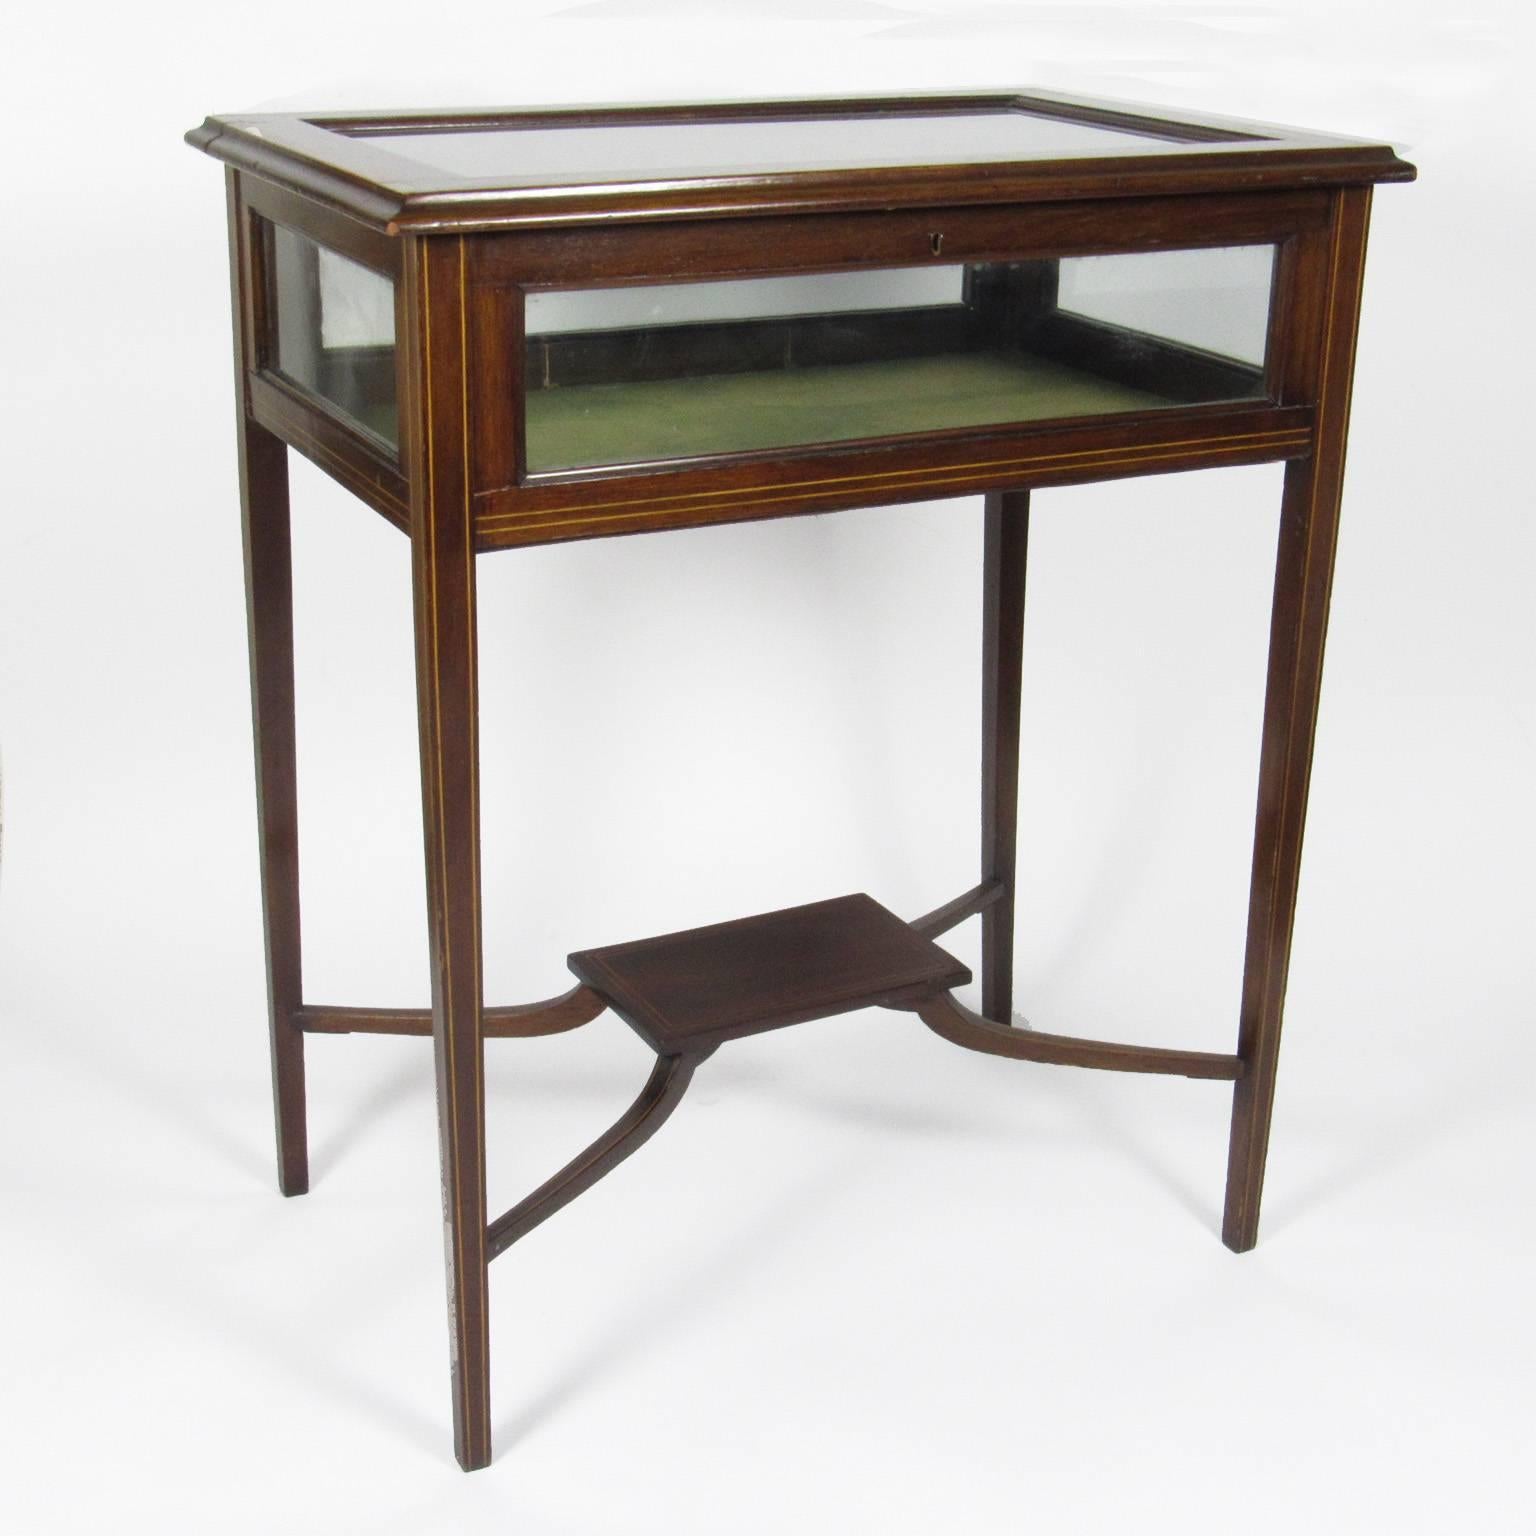 Early to mid-20th century inlaid mahogany vitrine table of rectangular form with glass lift top and green felted interior with lower shelf, raised on string inlaid tapered legs. Measures: Height 29 in., width 24 in., depth 16 in.